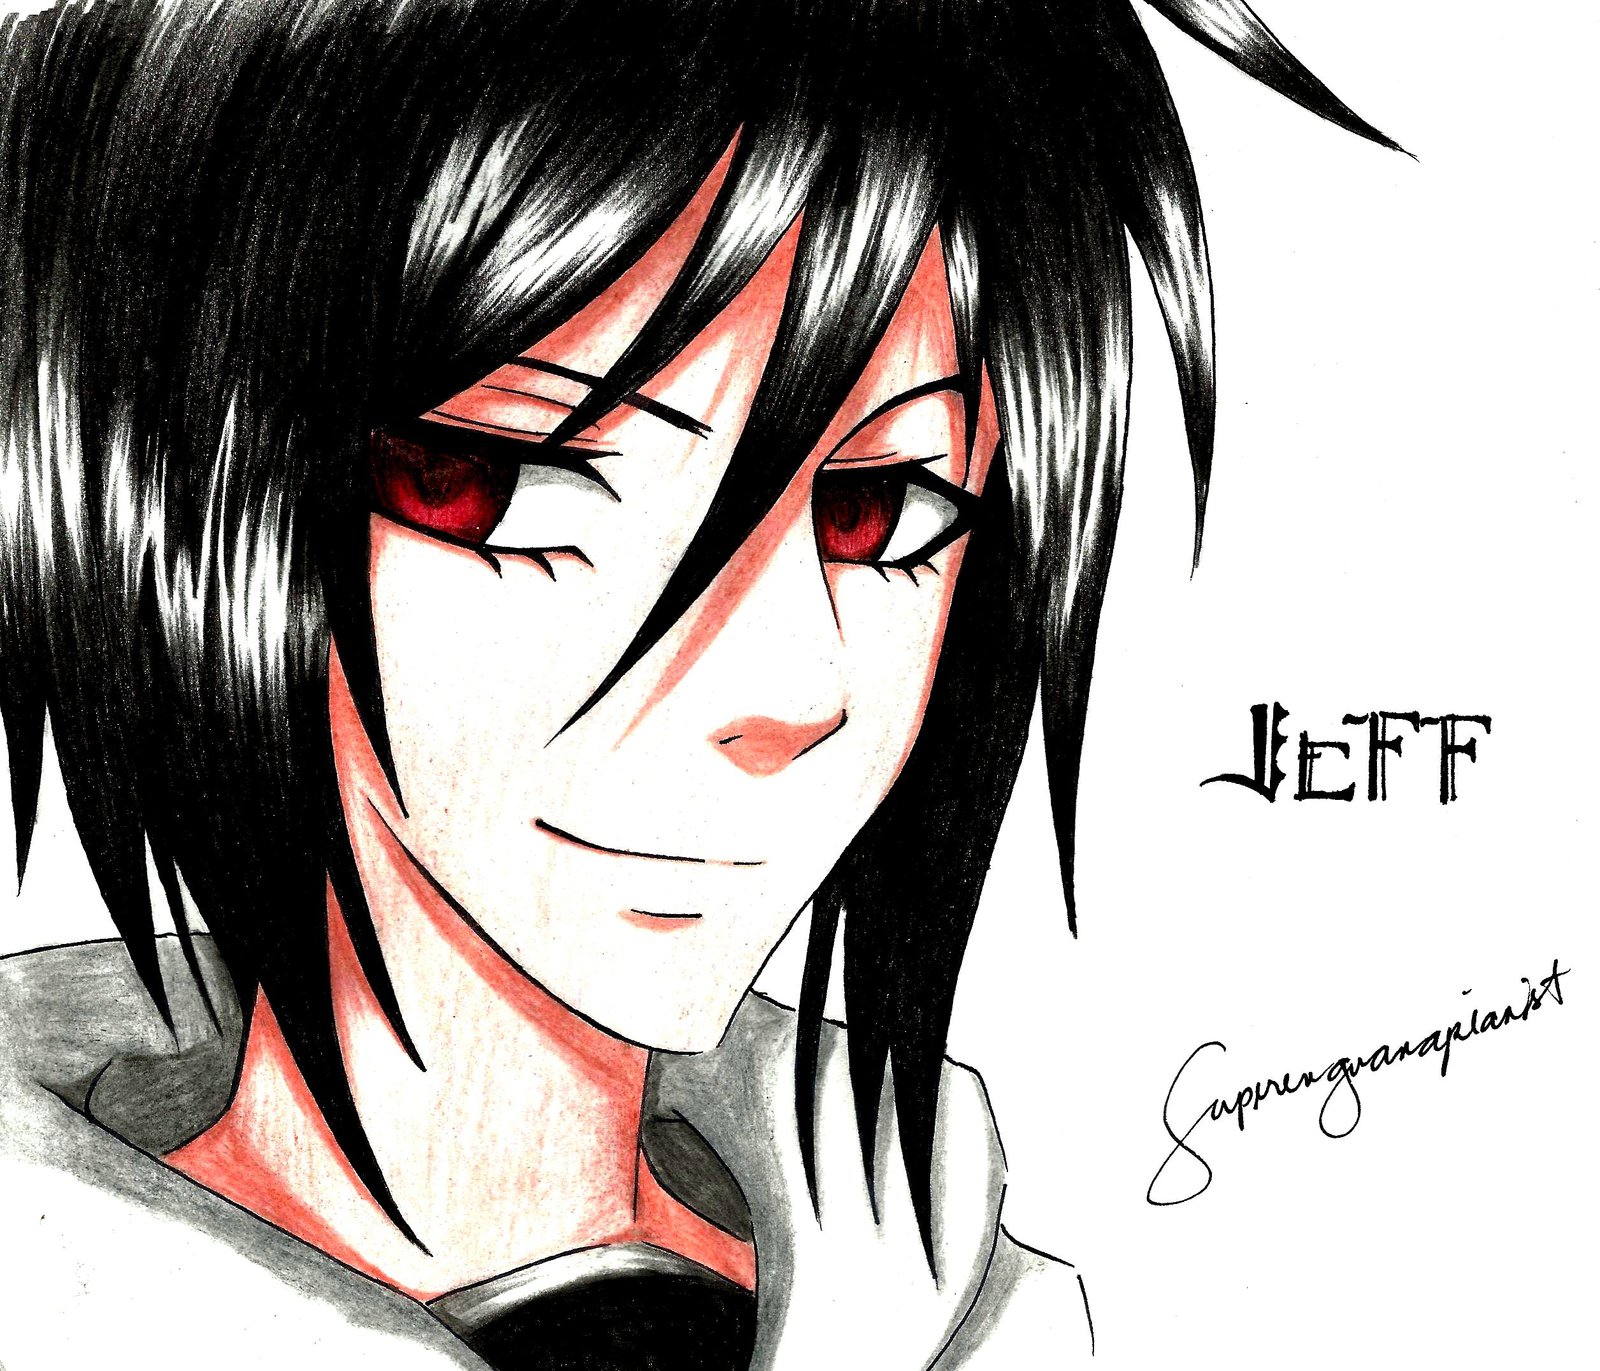 The Psychotic Killer A K Jeff By Superenguanapianist